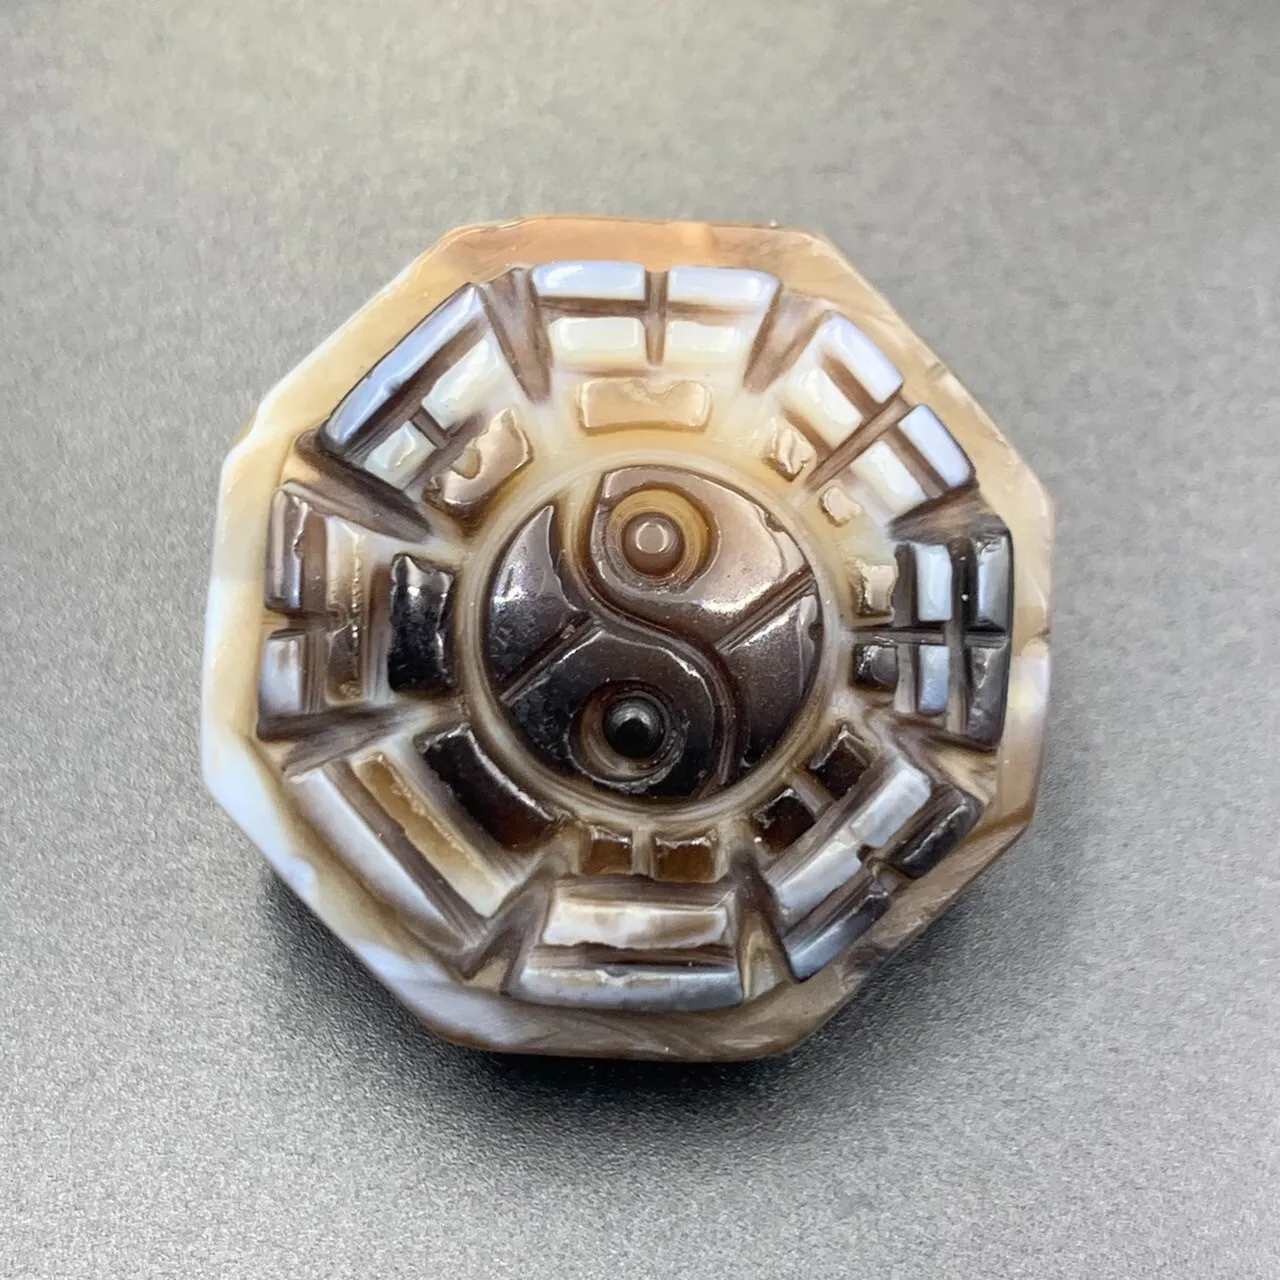 Awesome Himalayan Carved Agate Bead, Himalayan Asian Agate Bead, LBBR-49 - Image 2 of 6